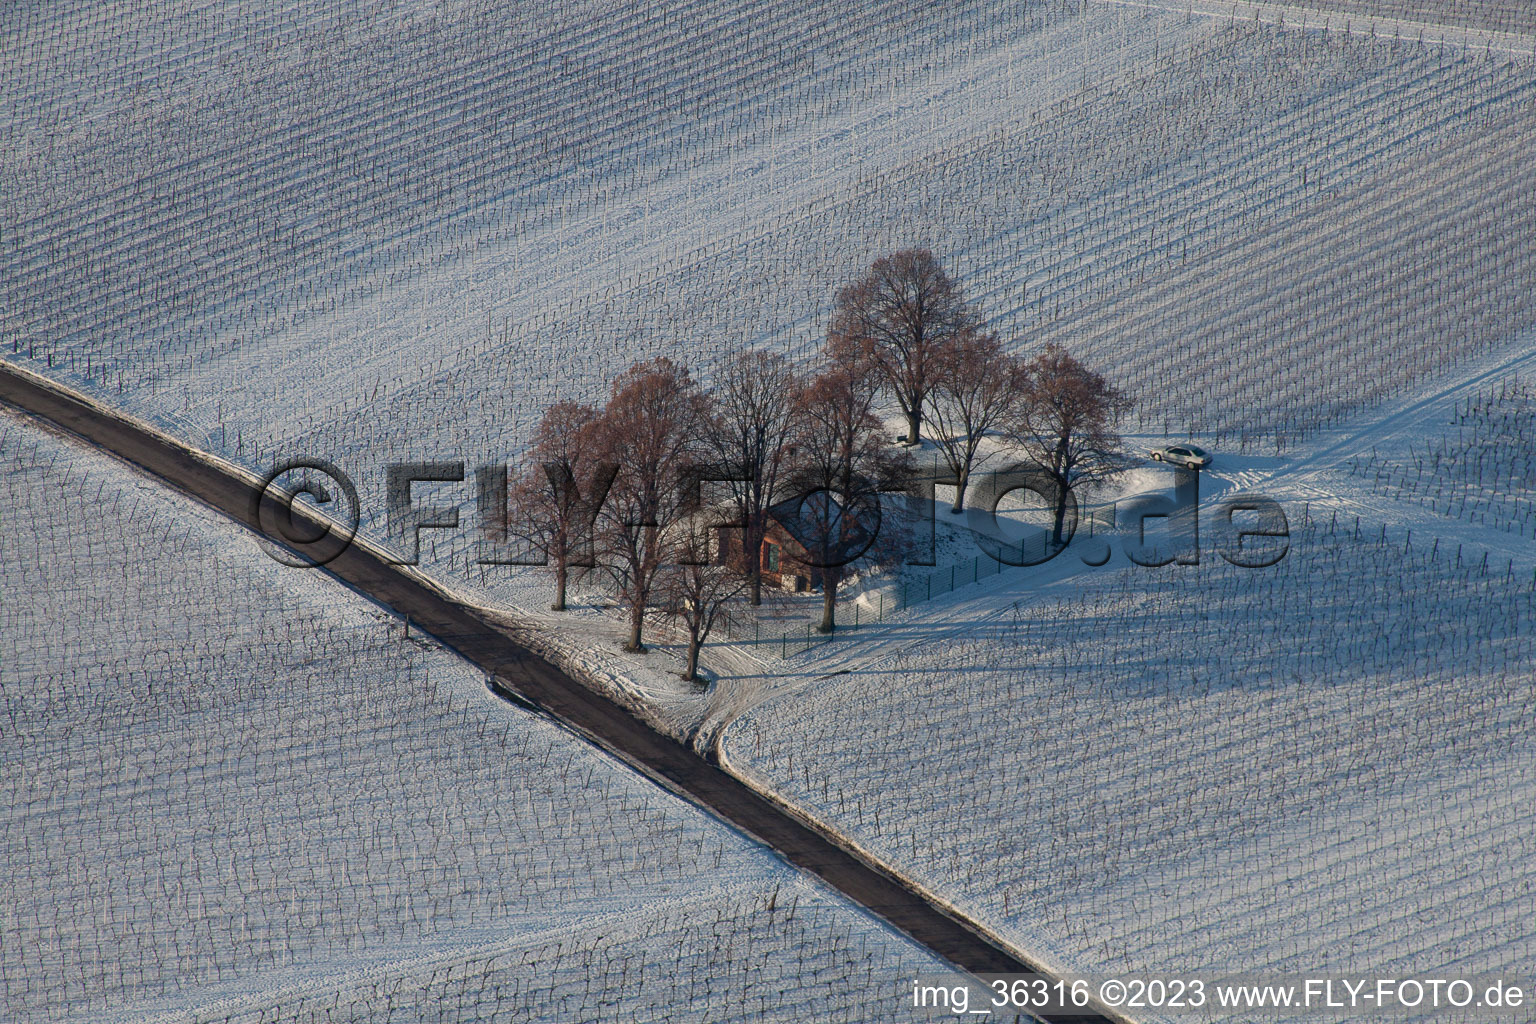 Impflingen in the state Rhineland-Palatinate, Germany from above